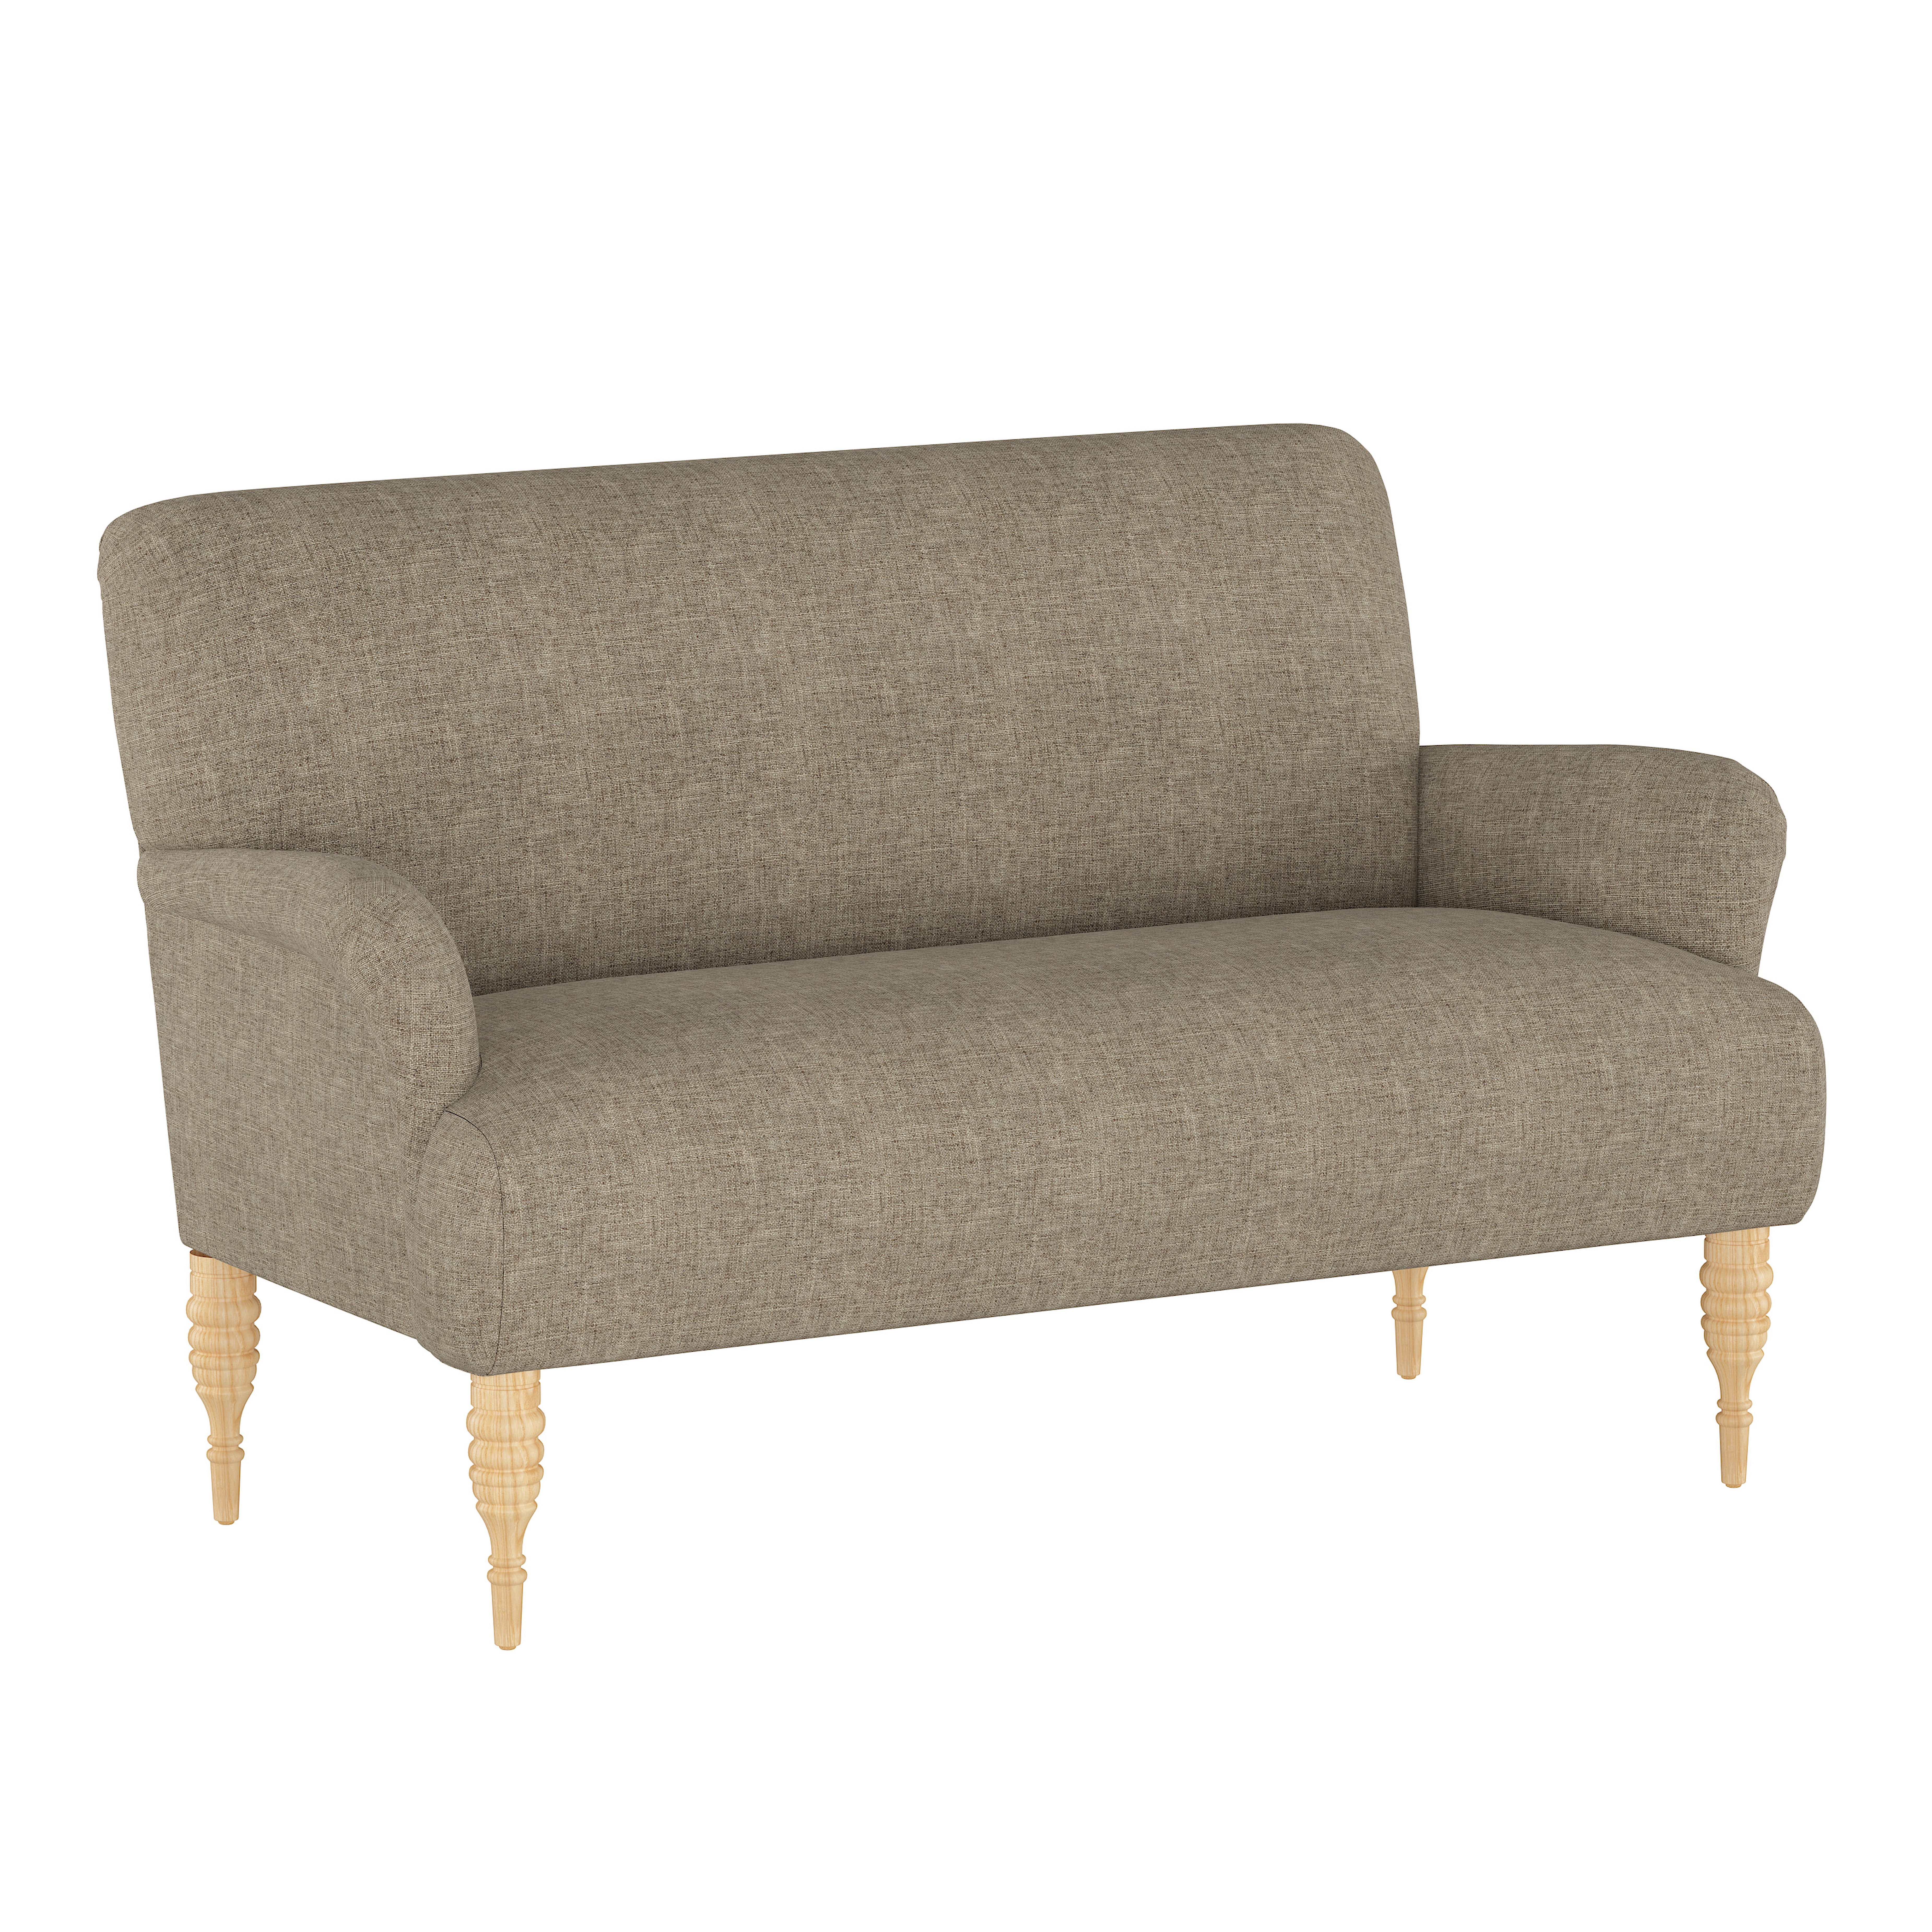 Clermont Settee, Linen - Cove Goods